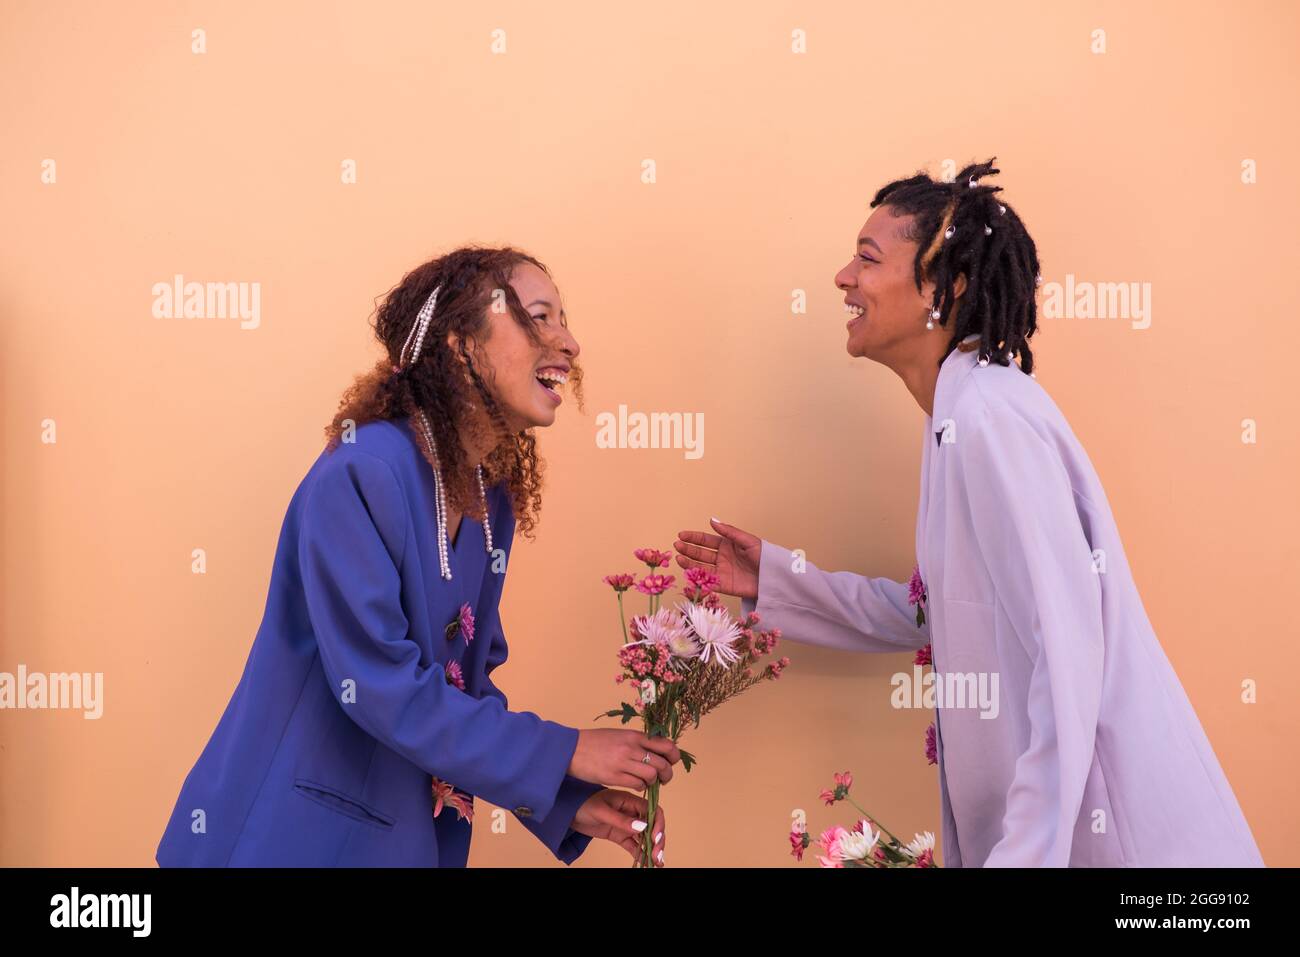 Candid portrait of two woman sharing in laughter Stock Photo